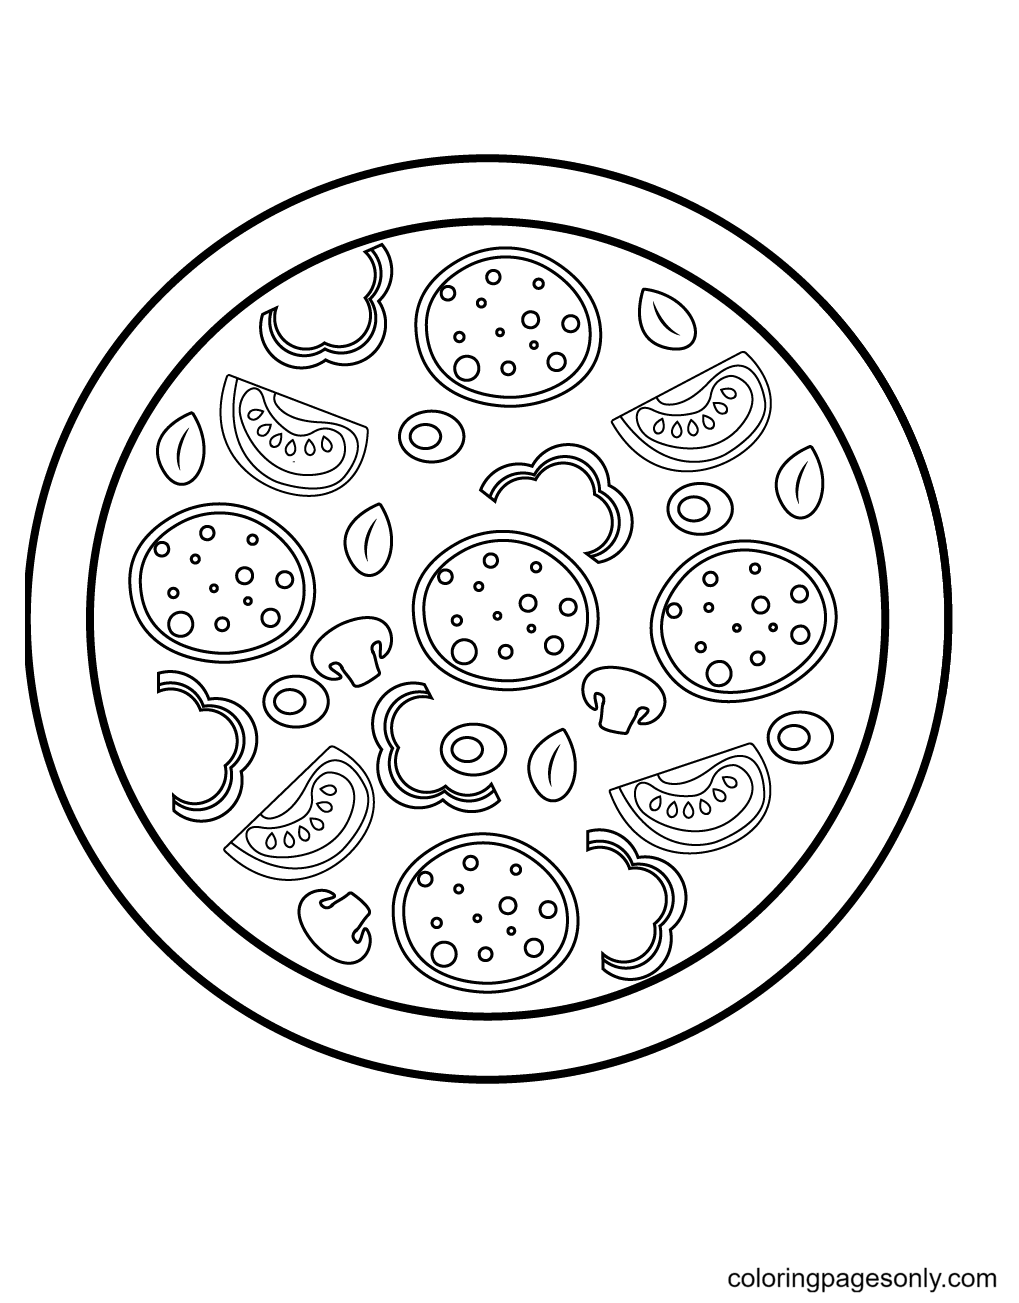 Pizza with pepperonis, tomatoes, olives, bell peppers, and mushrooms Coloring Page